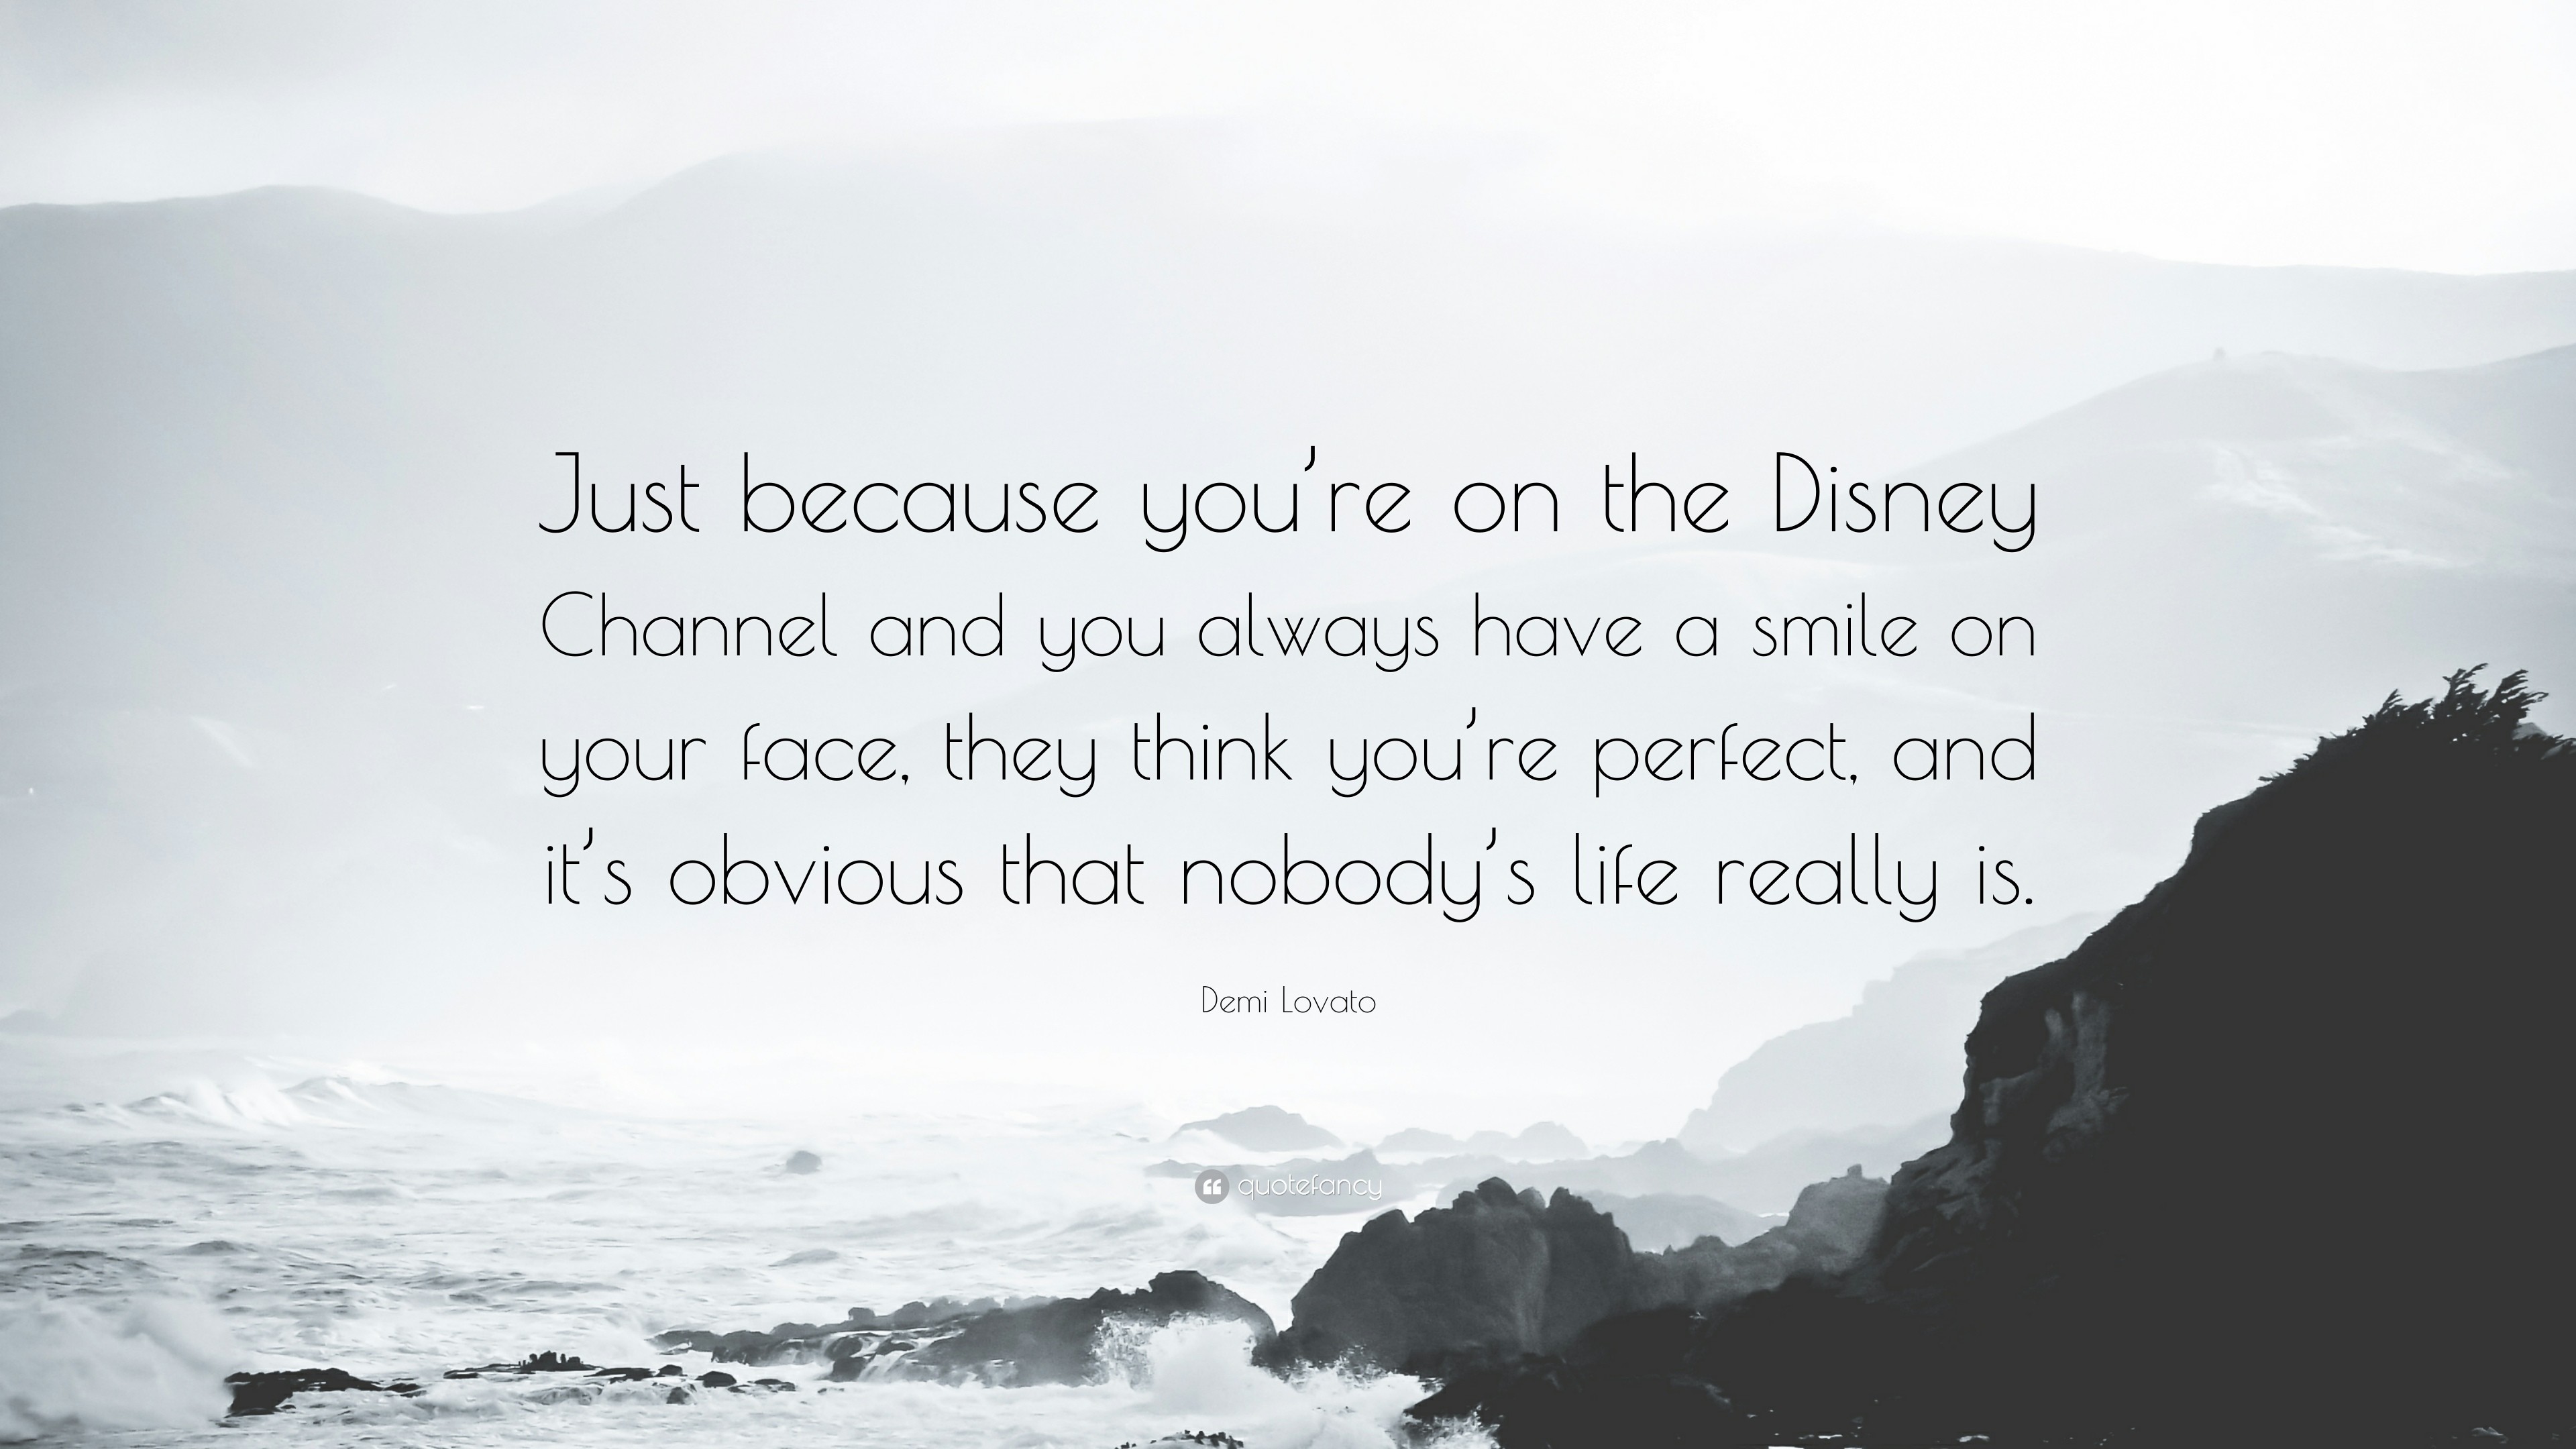 3840x2160 Demi Lovato Quote: “Just because you're on the Disney Channel and you